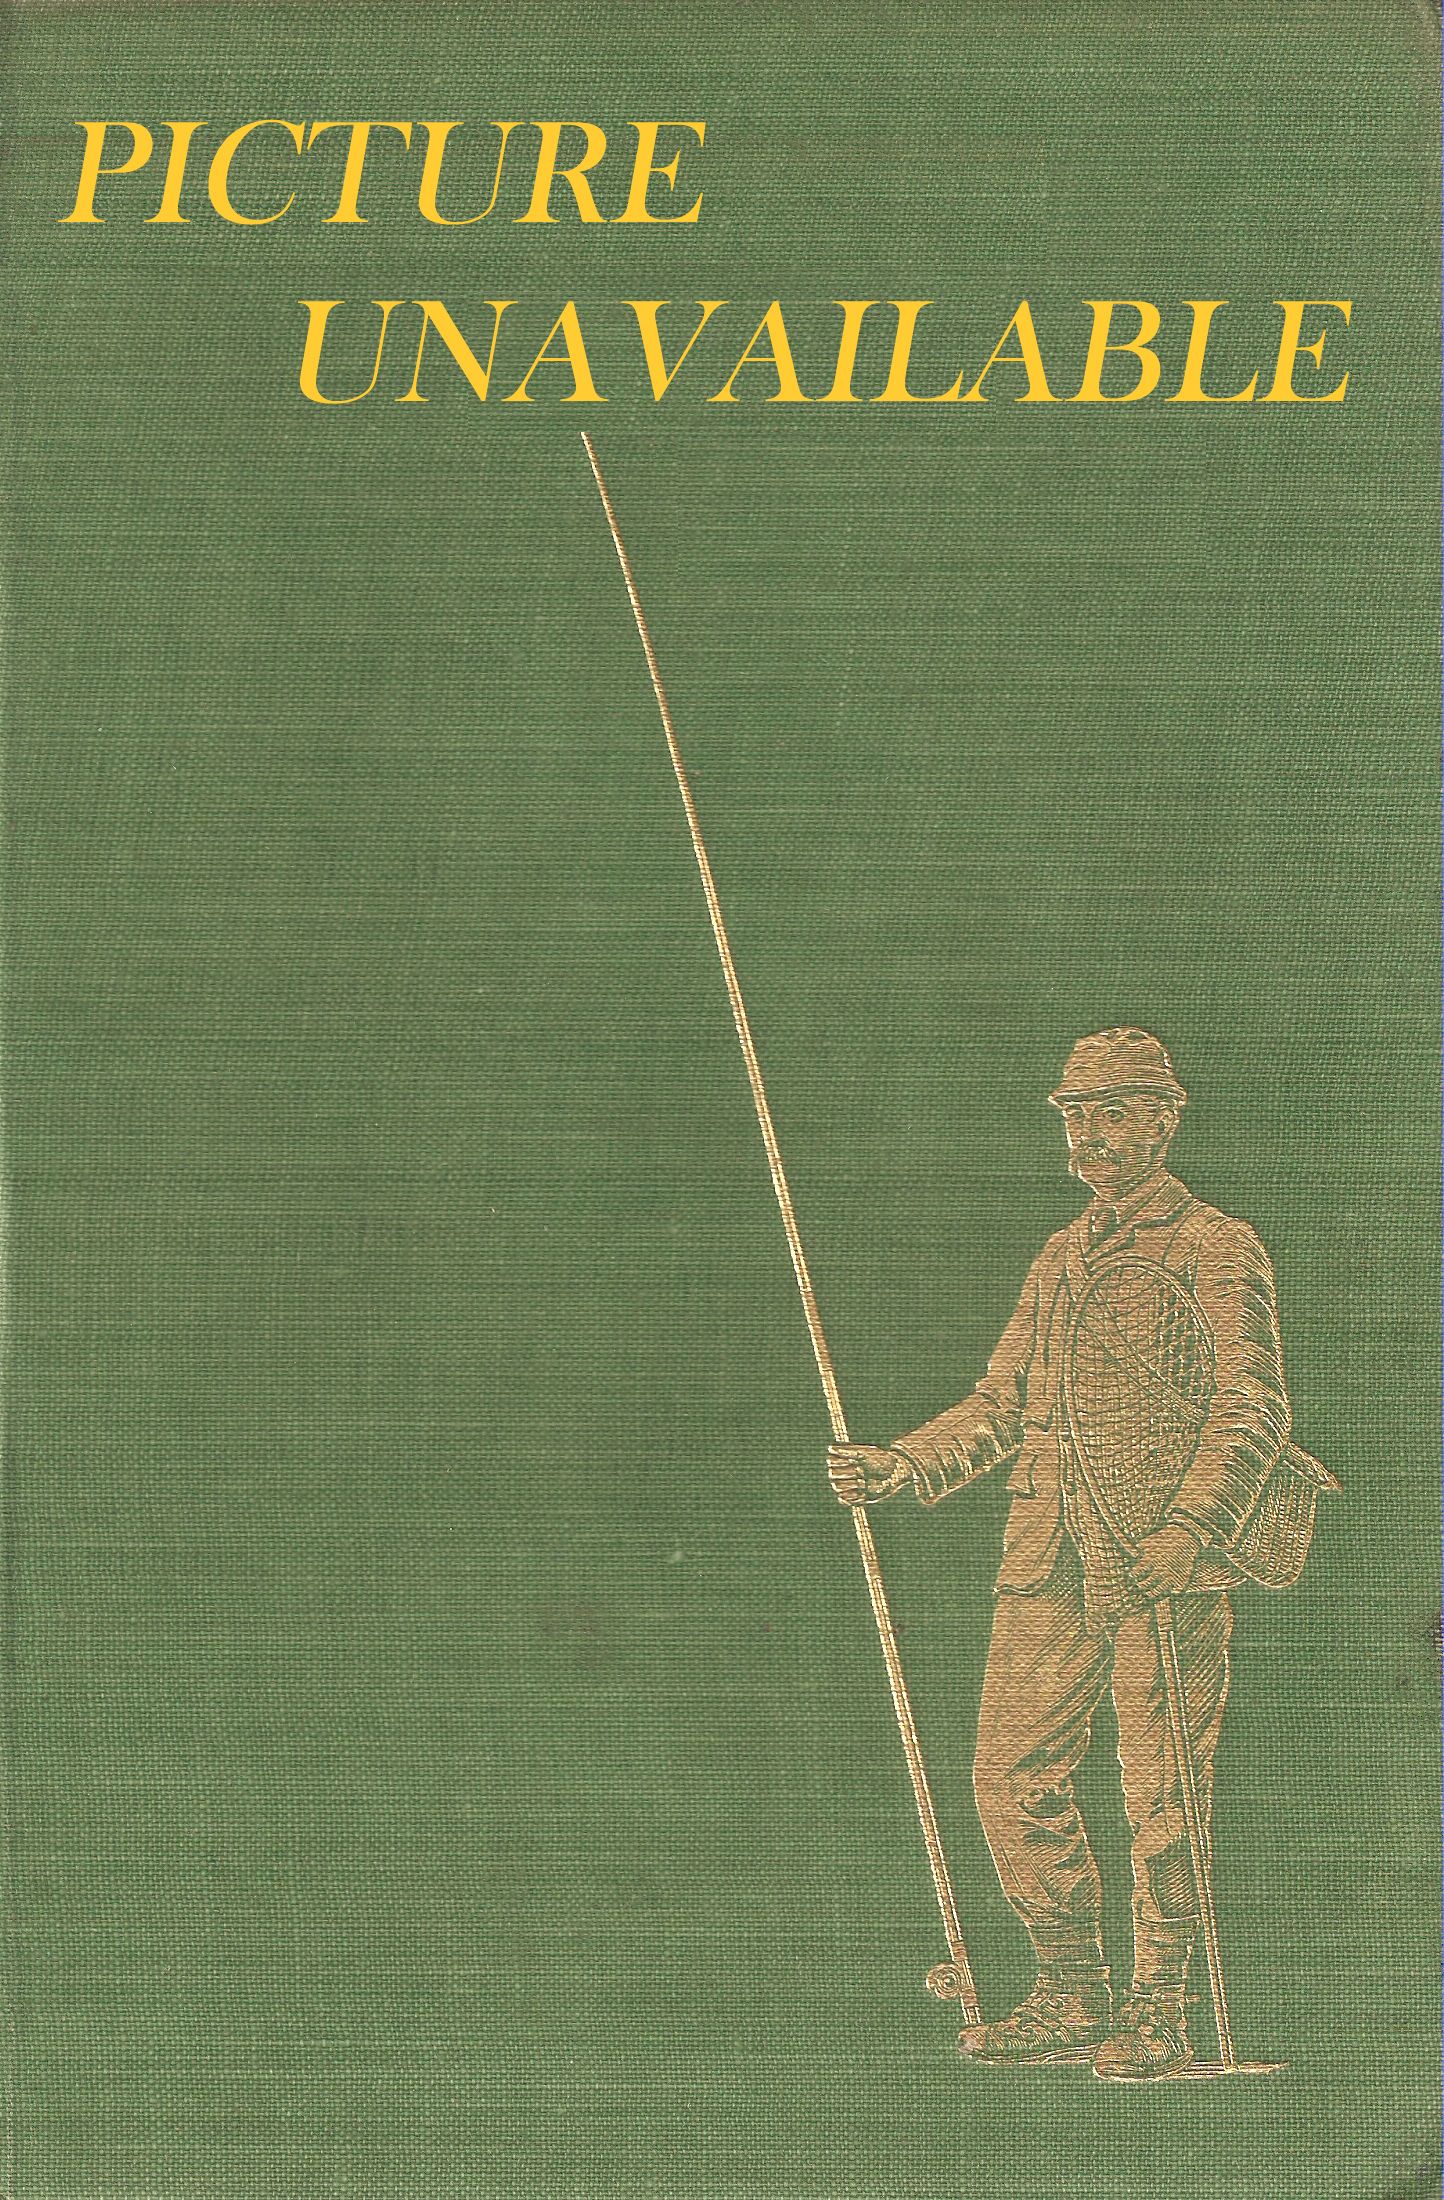 TIDDLERS: OR, THE ART OF FISHING FOR STICKLEBACKS. A Paper read before the  Sette of Odd Volumes at Apothecaries' Hall, Black Friars Lane, on Ladies'  Night, June 3rd 1958, by Raymond Lister, Blacksmith to the Sette.